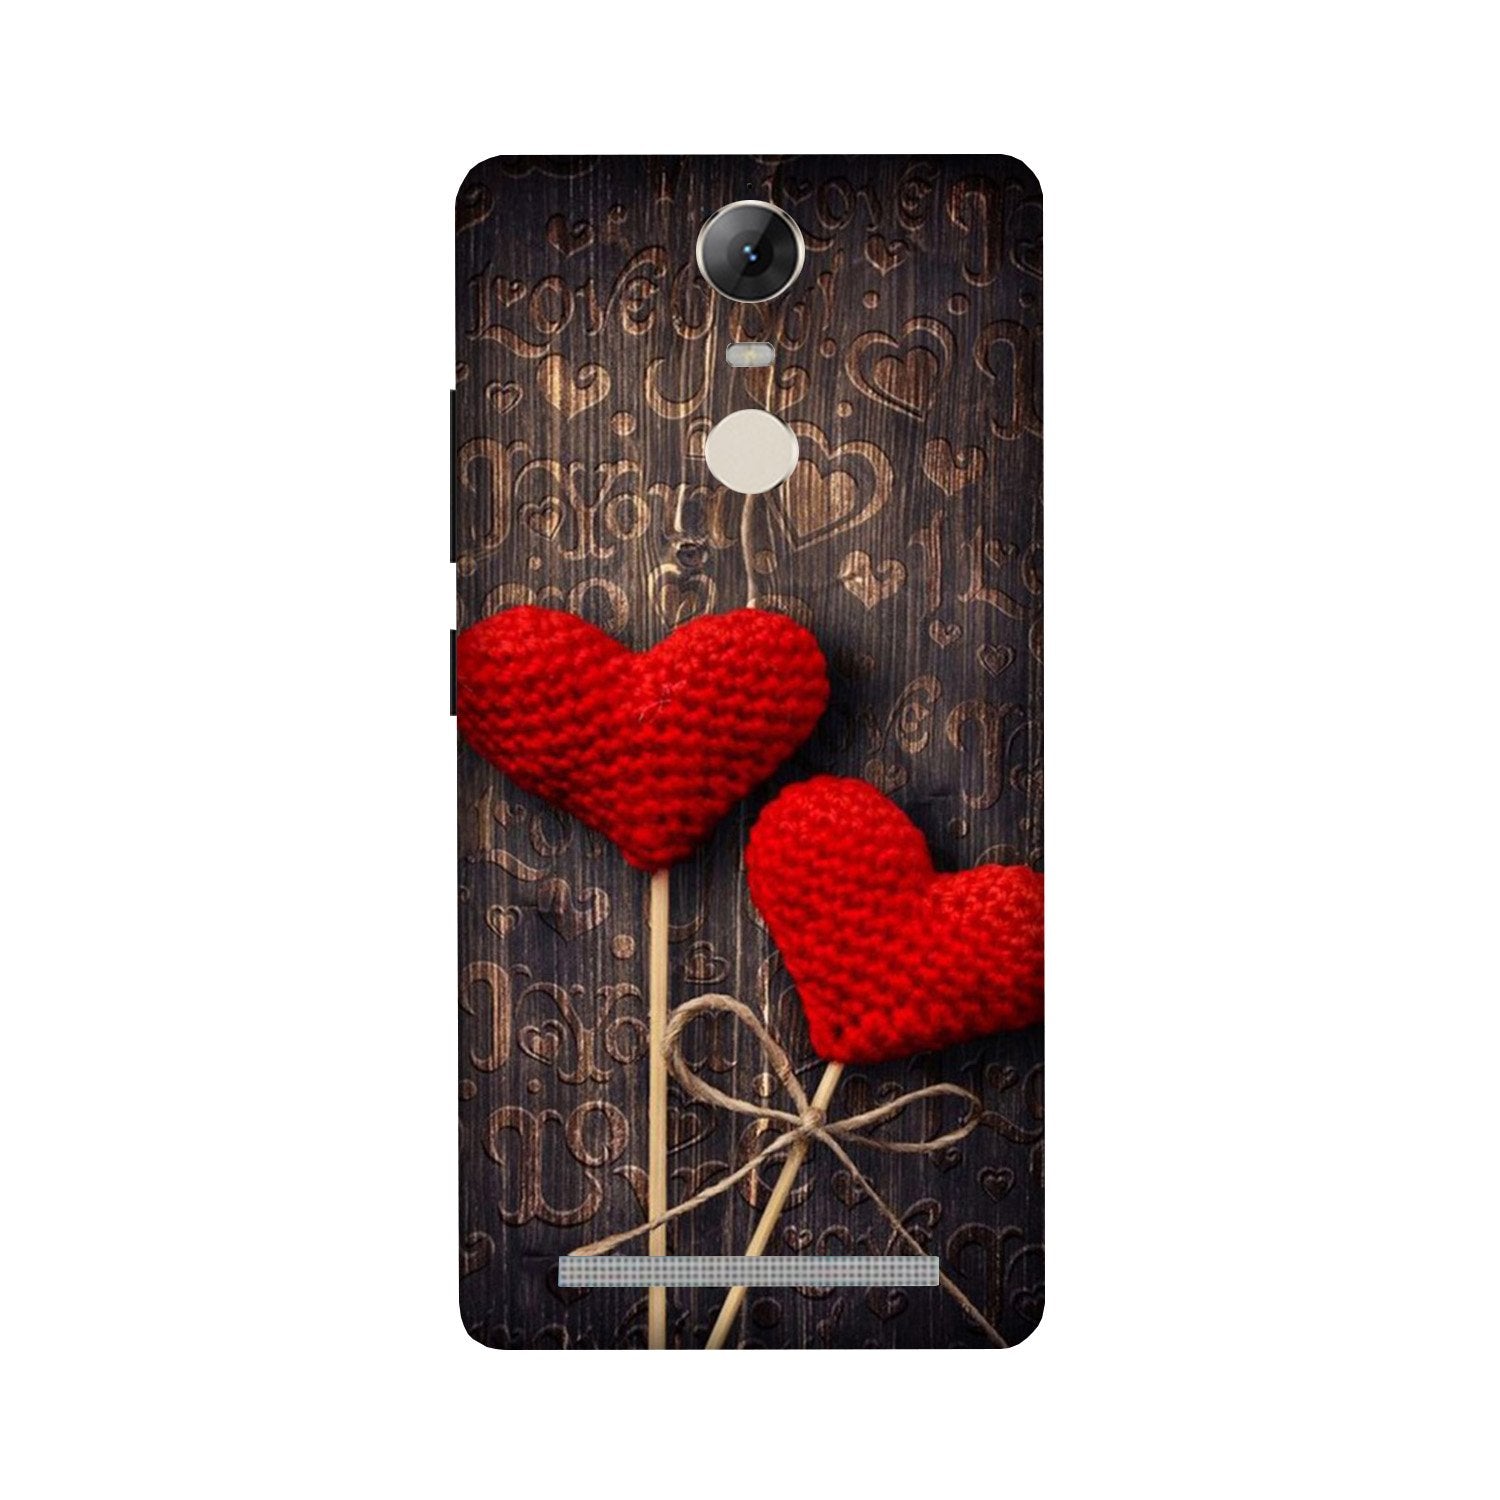 Red Hearts Case for Lenovo Vibe K5 Note